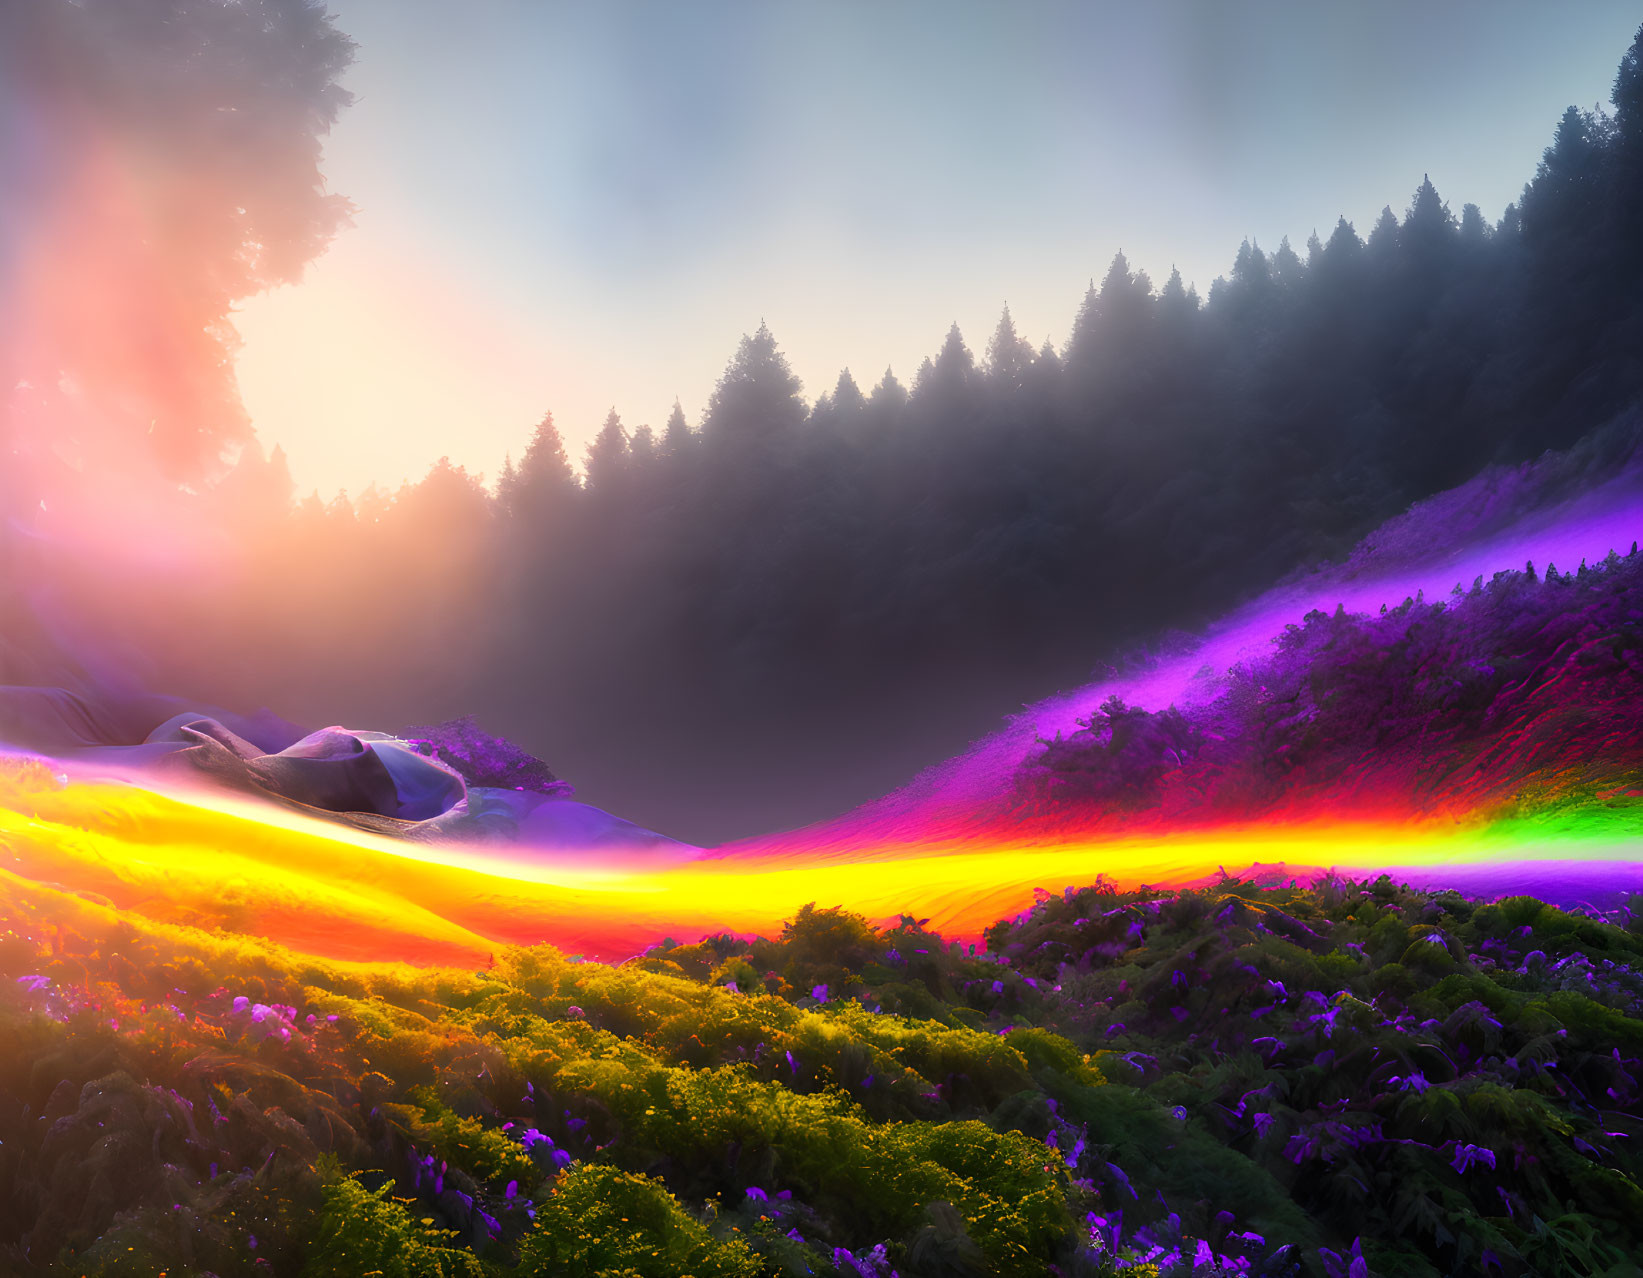 Colorful landscape with rainbow river, purple valley, foggy sky, and tree silhouettes